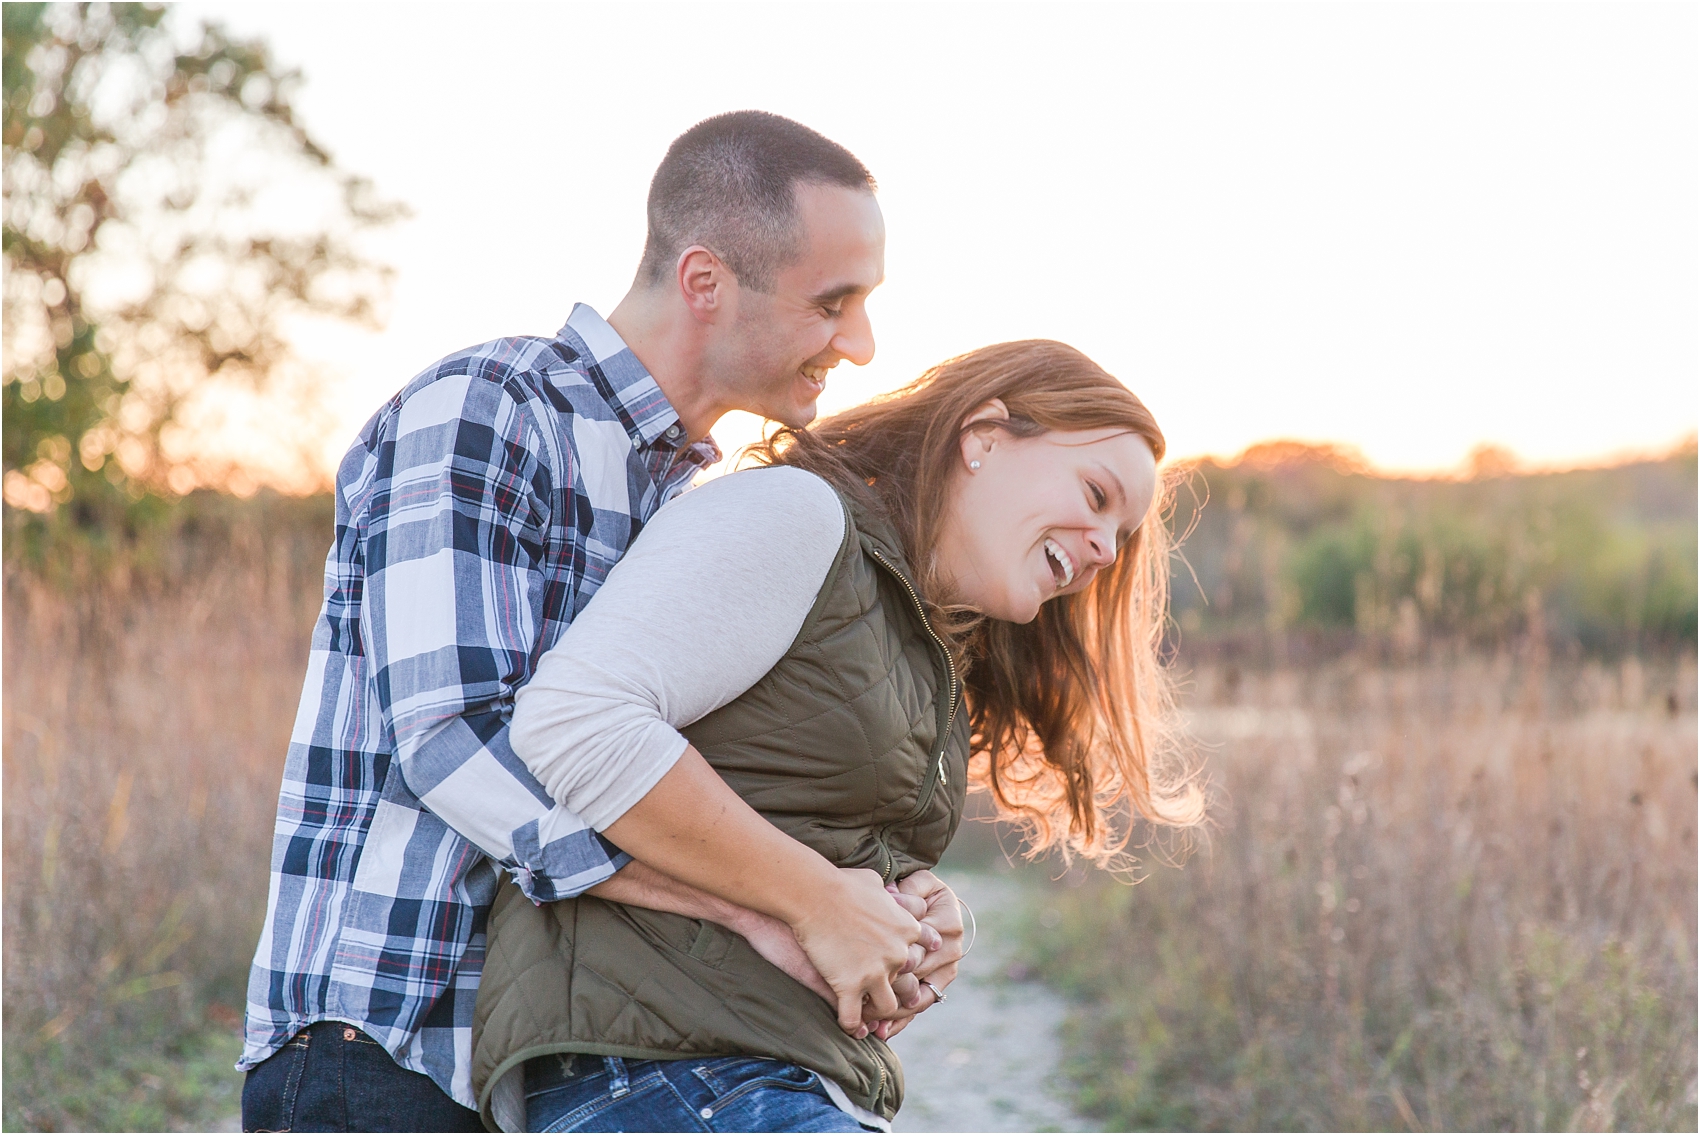 romantic-fall-engagement-photos-at-indian-springs-metropark-in-clarkston-mi-by-courtney-carolyn-photography_0014.jpg